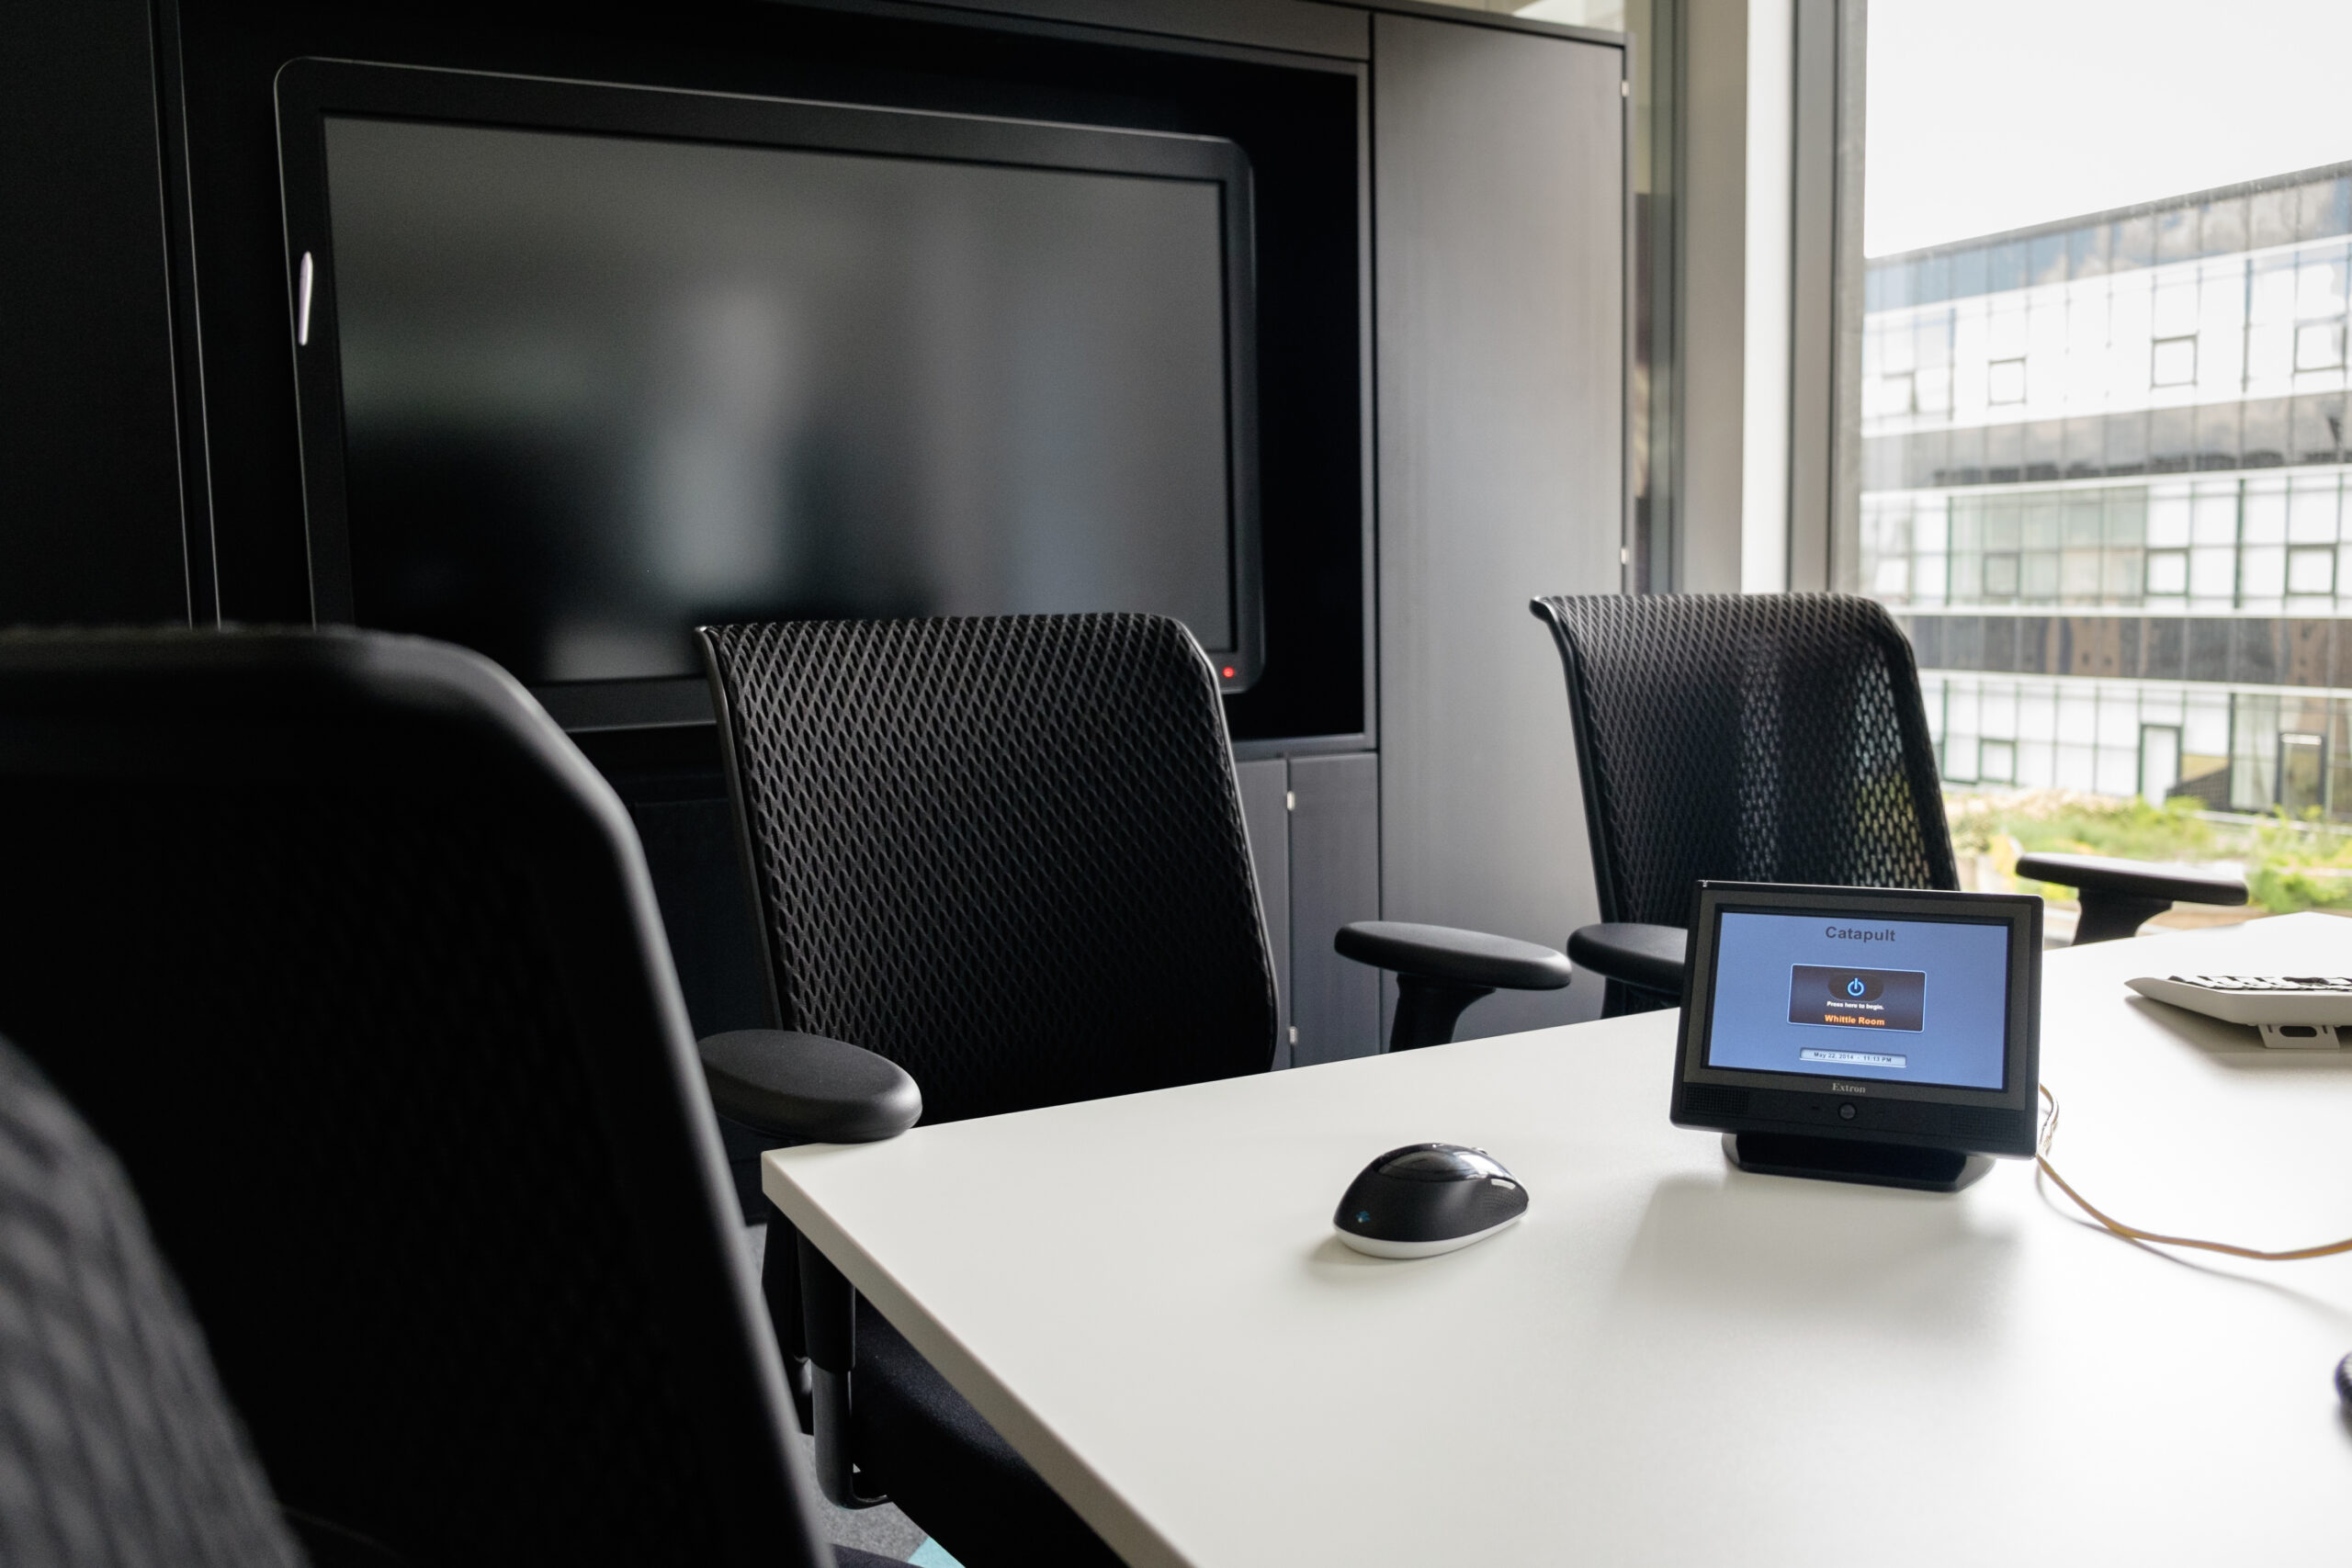 Conference room and video calling capabilities